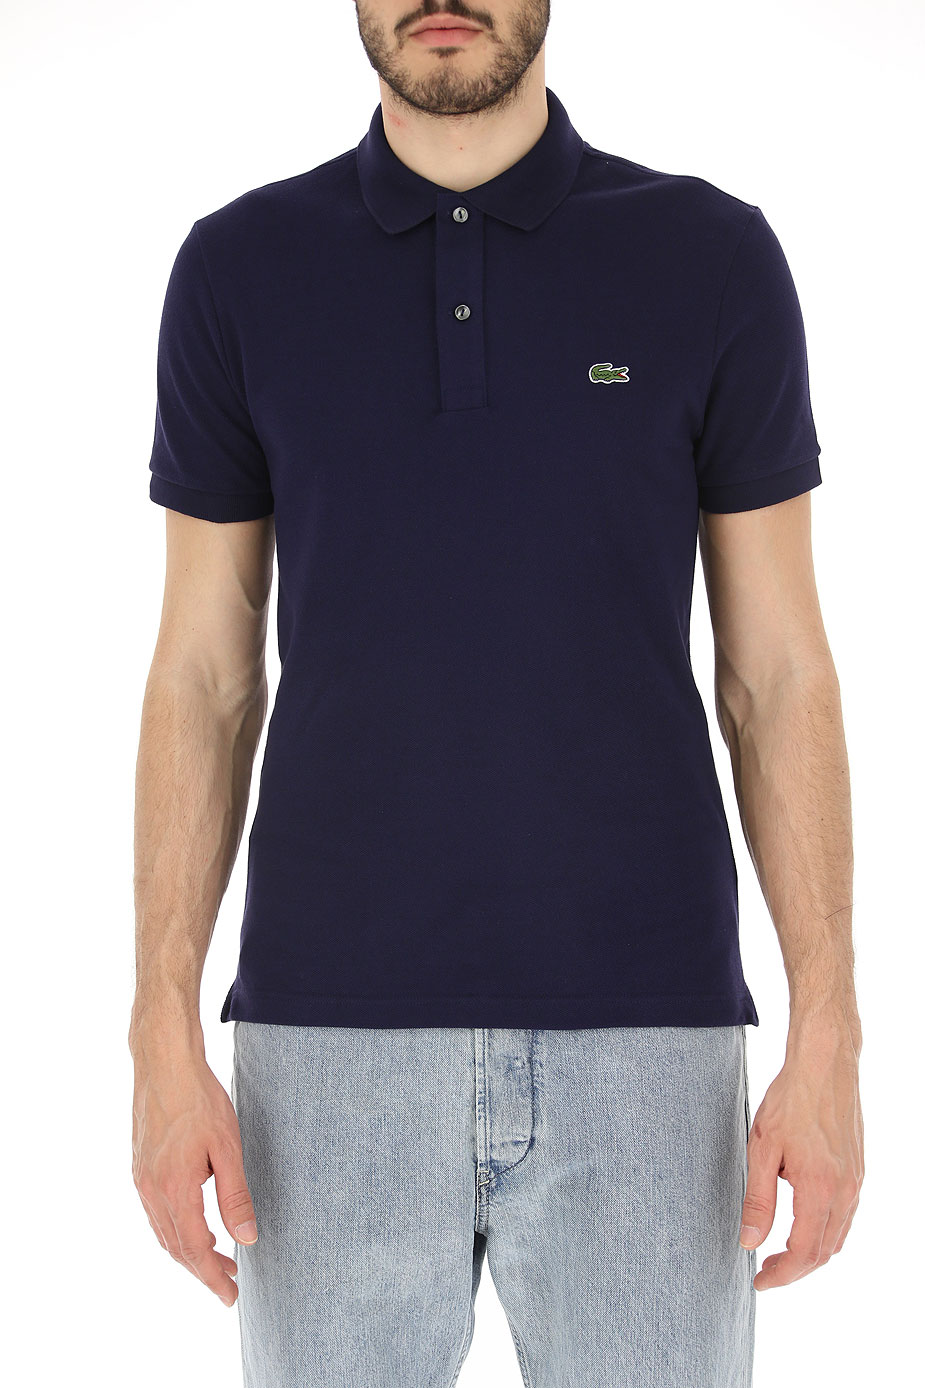 Mens Clothing Lacoste, Style code: ph4012-166-